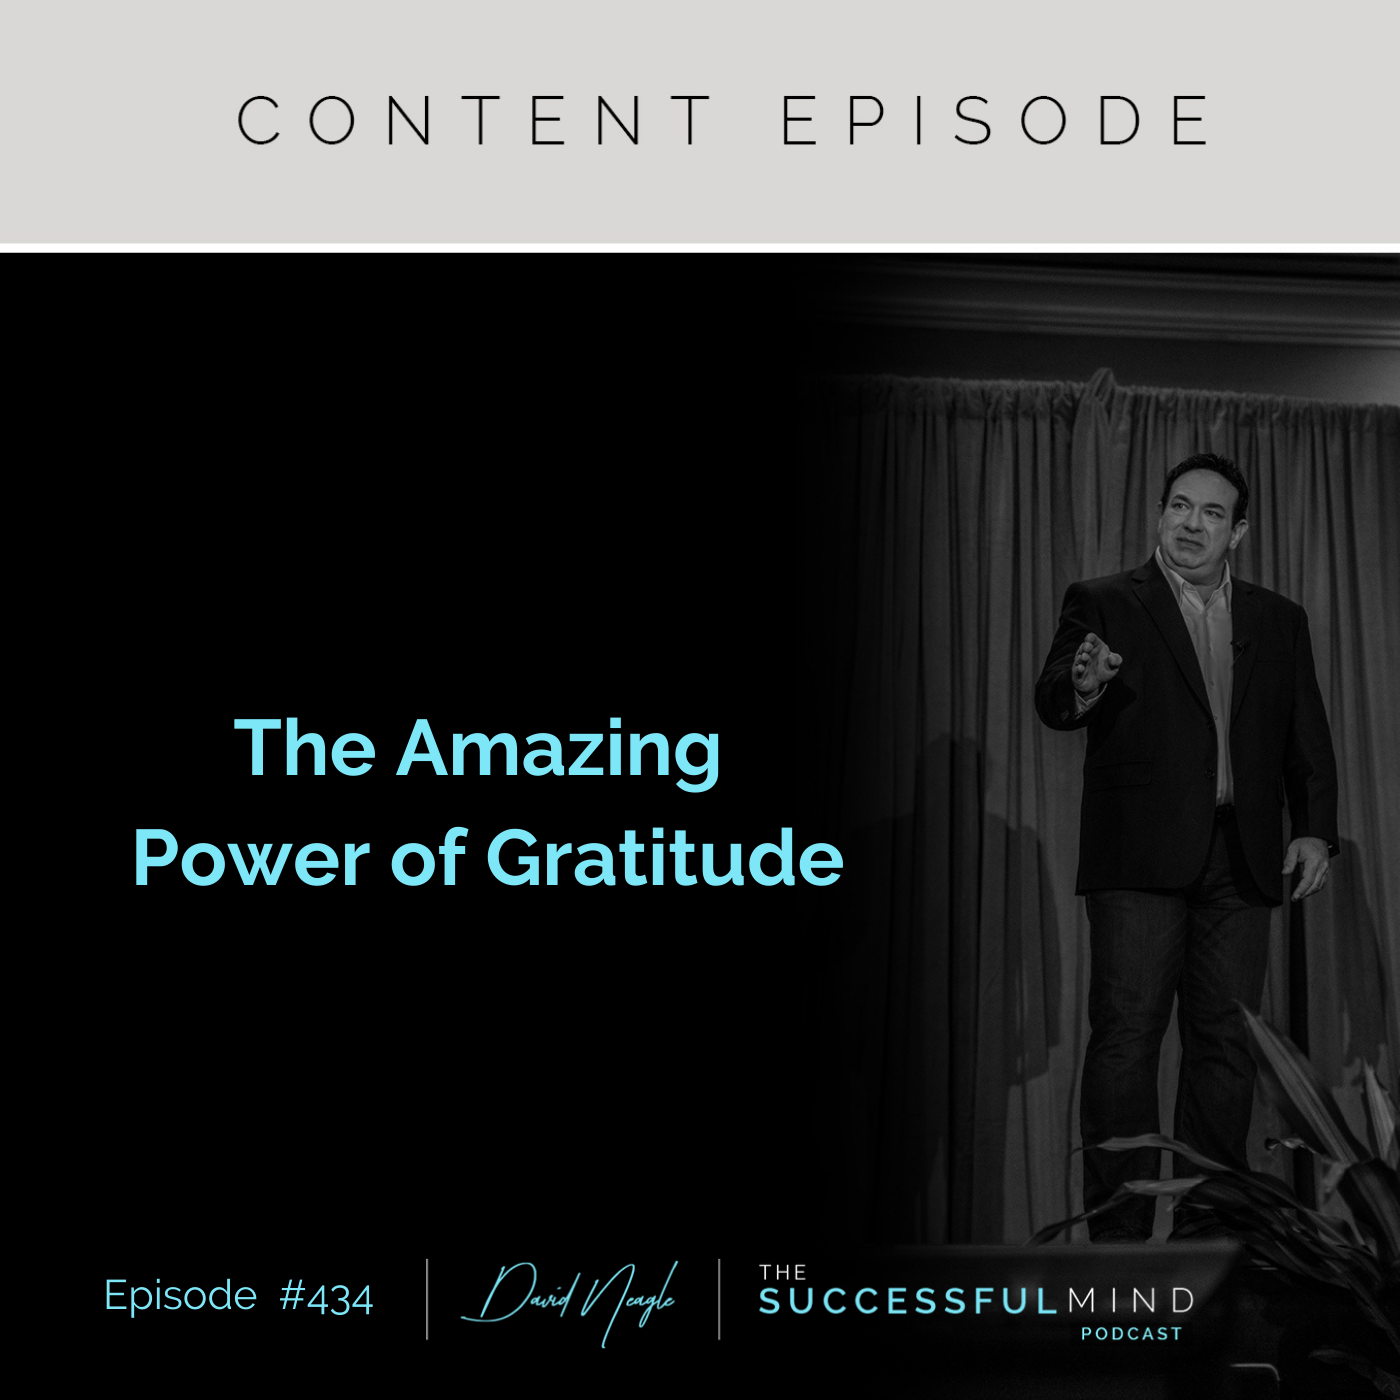 The Successful Mind Podcast - Episode 434 - The Amazing Power of Graititude